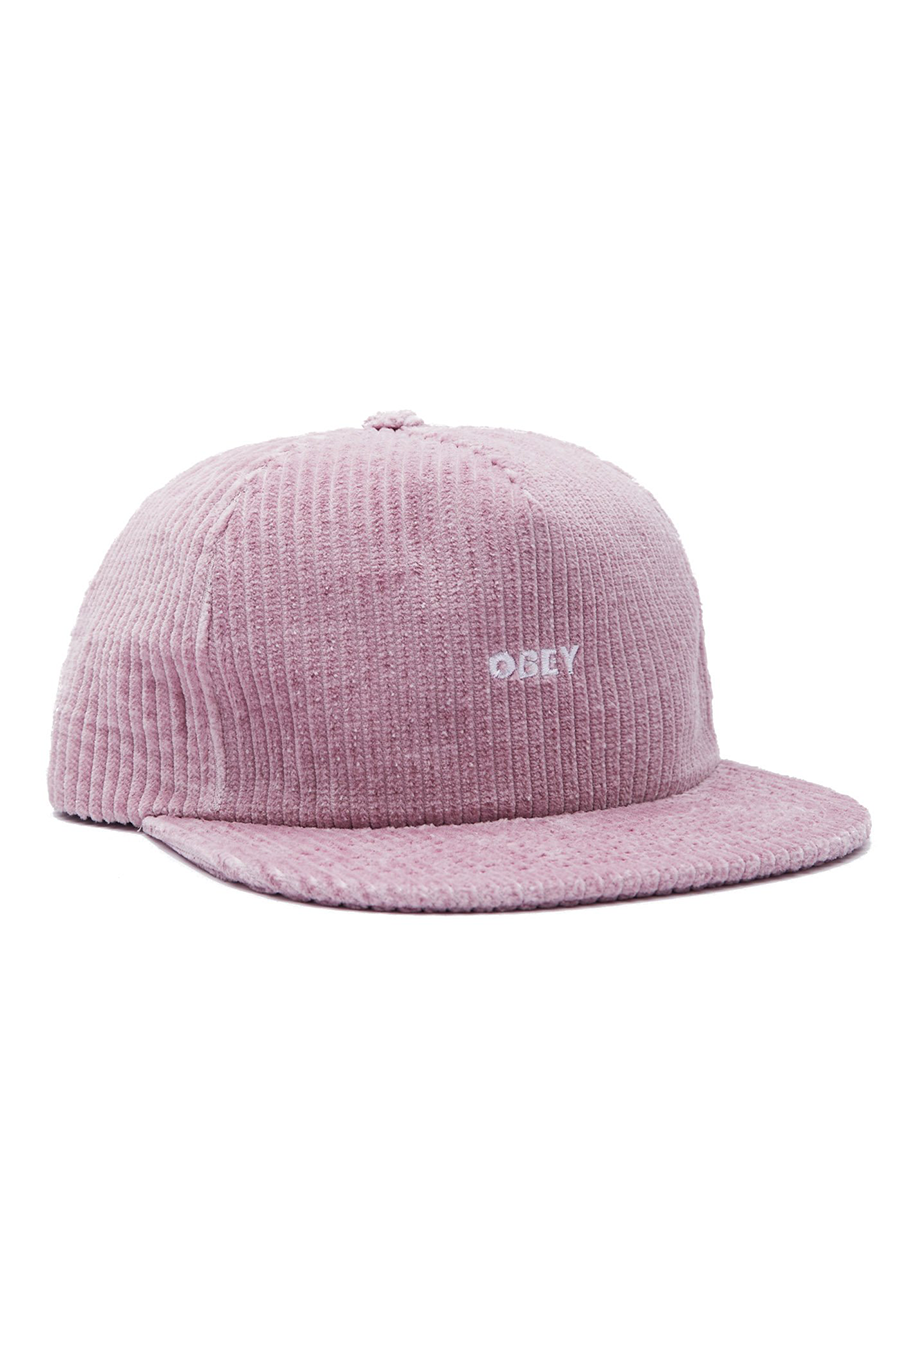 Bold Cord Strapback | Dusty Rose - Main Image Number 1 of 2